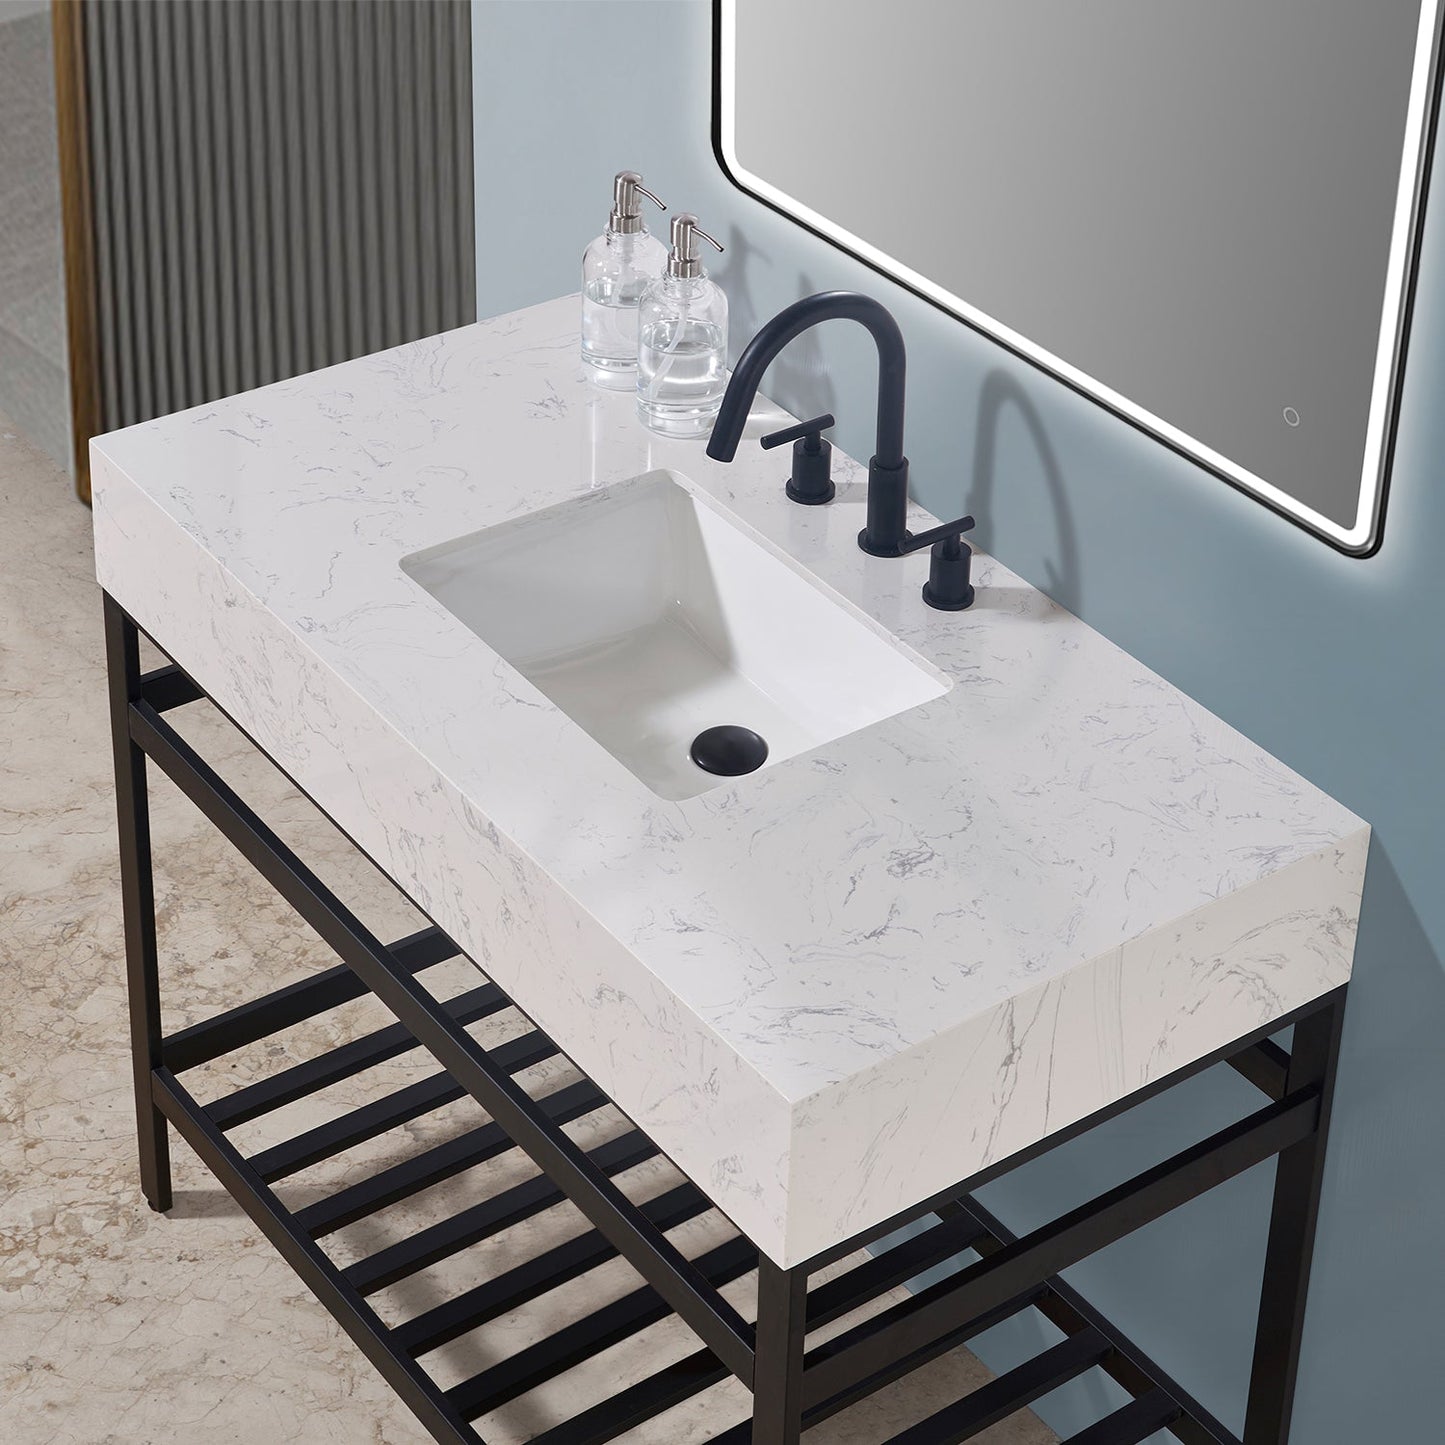 Merano 42" Single Stainless Steel Vanity Console in Matt Black with Aosta White Stone Countertop and Mirror